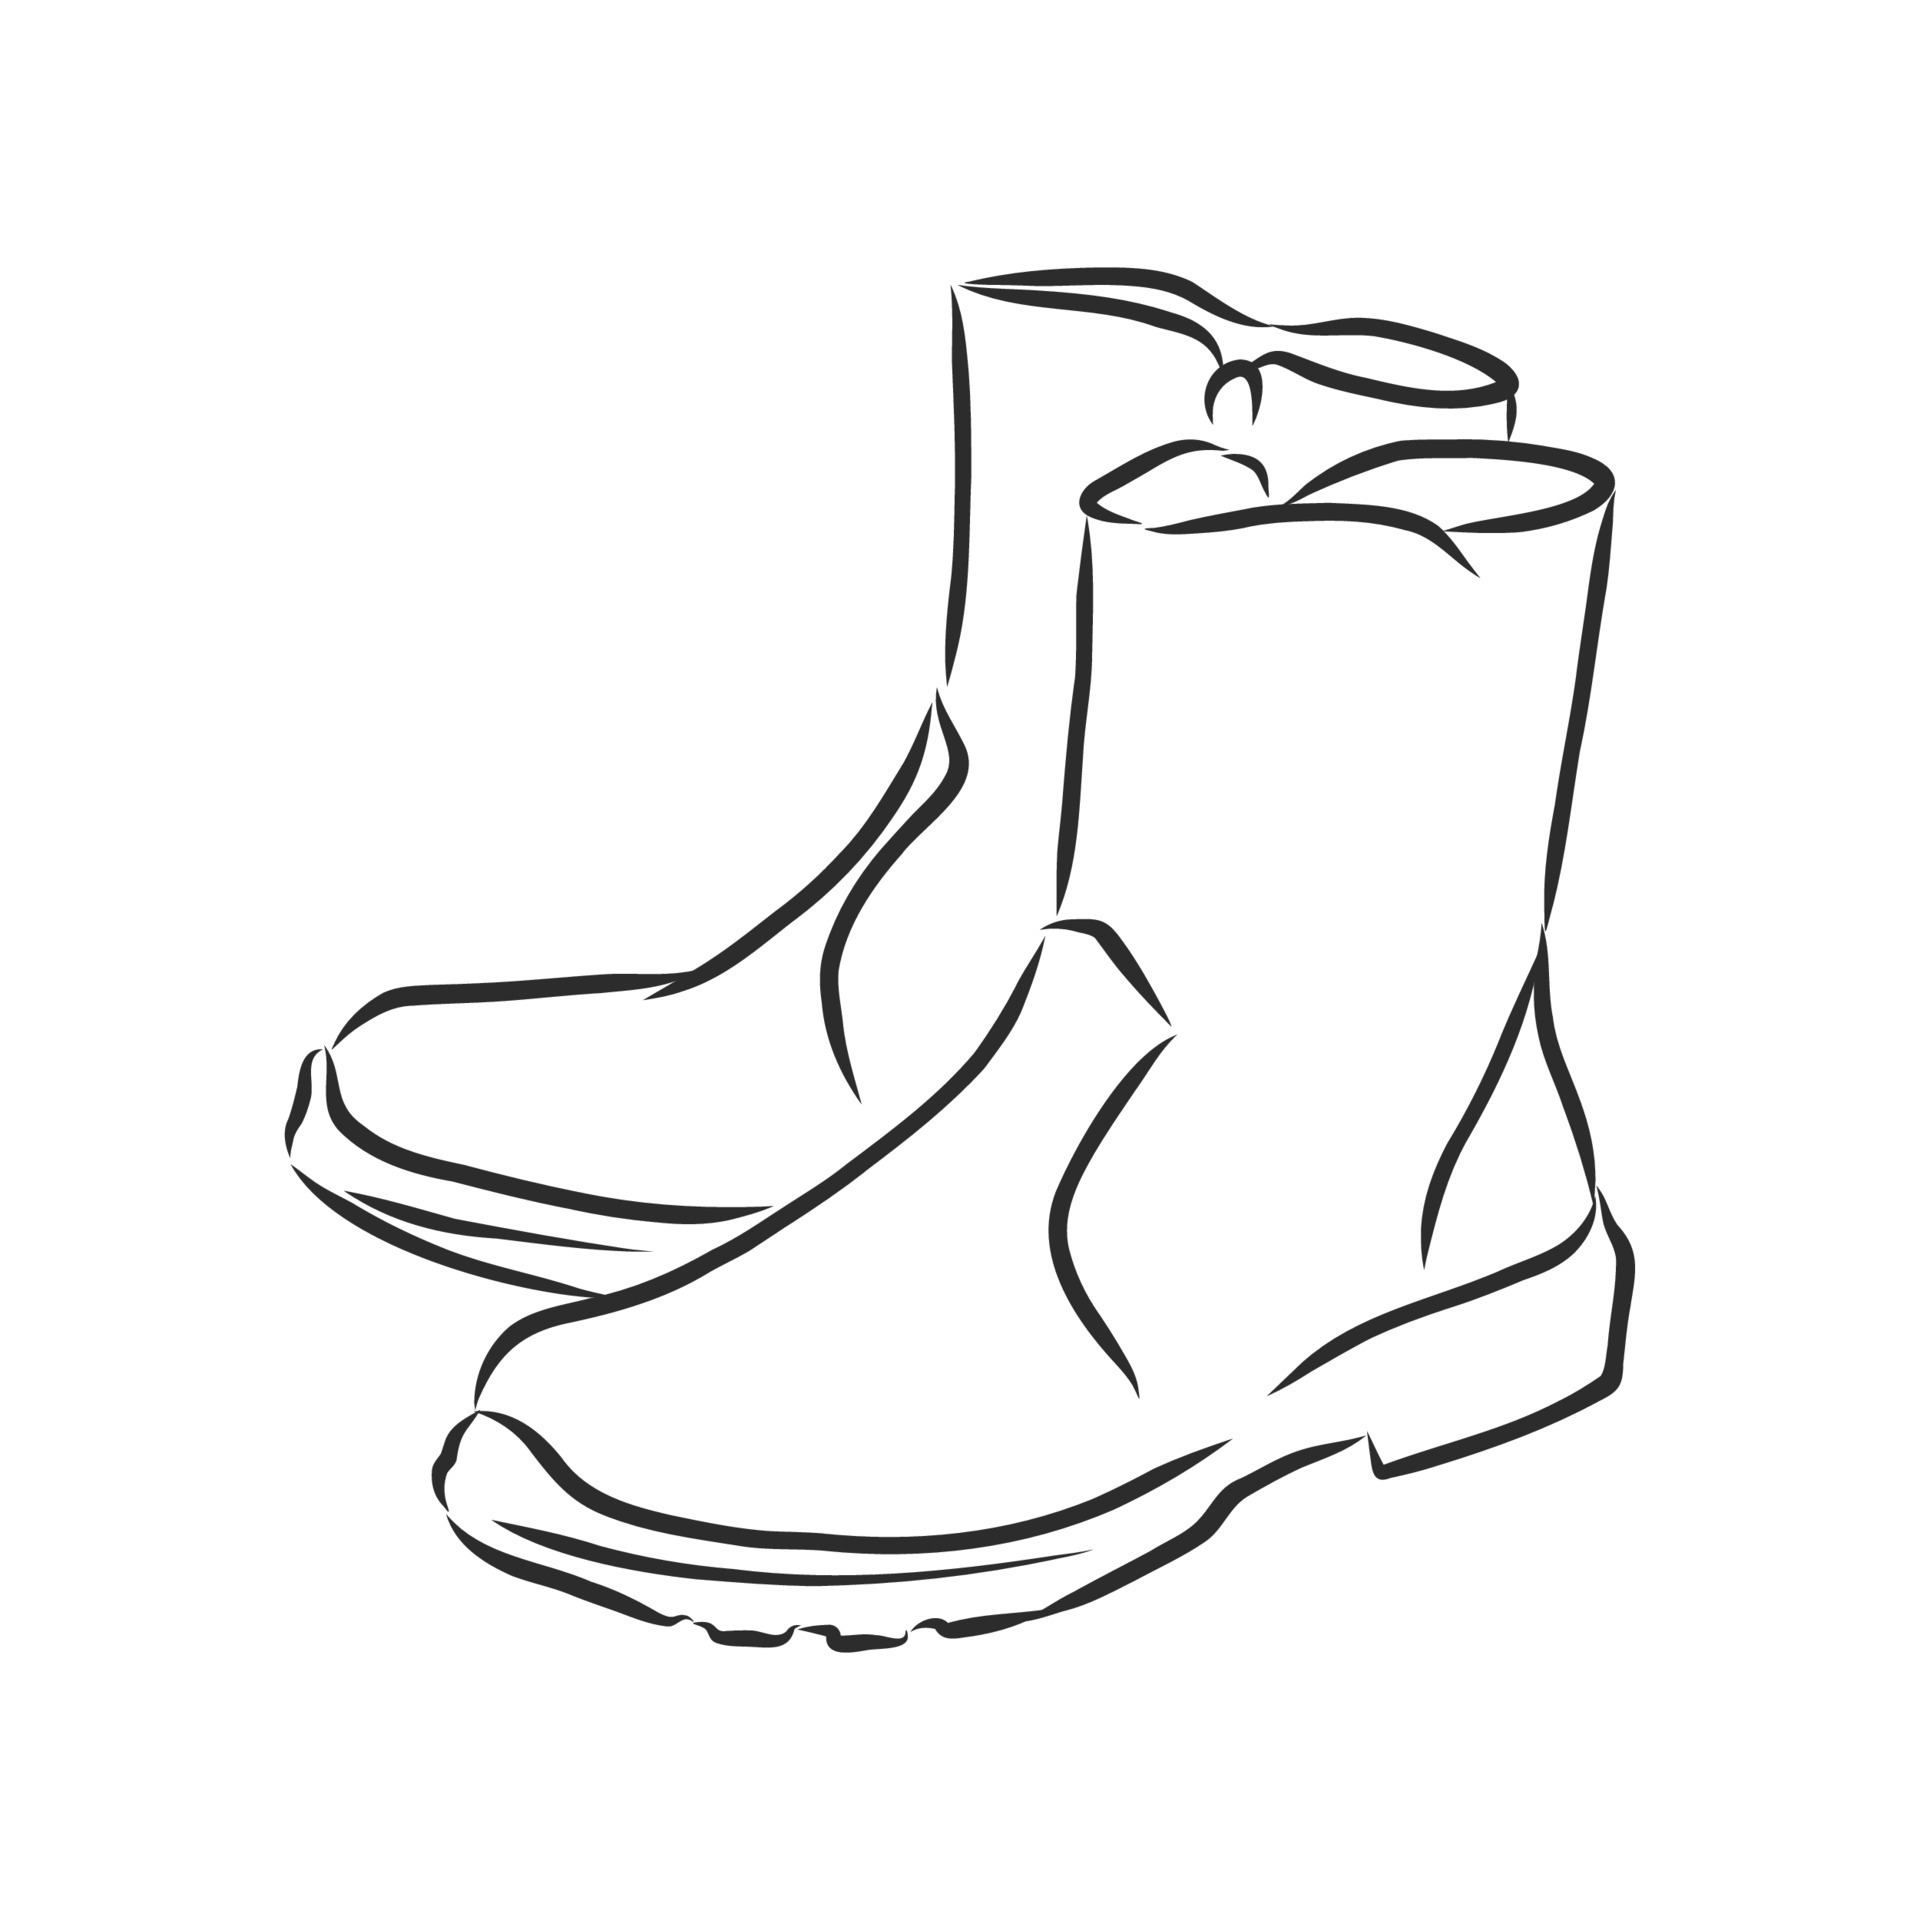 9 Boot sketches ideas | sketches, drawings, drawing clothes